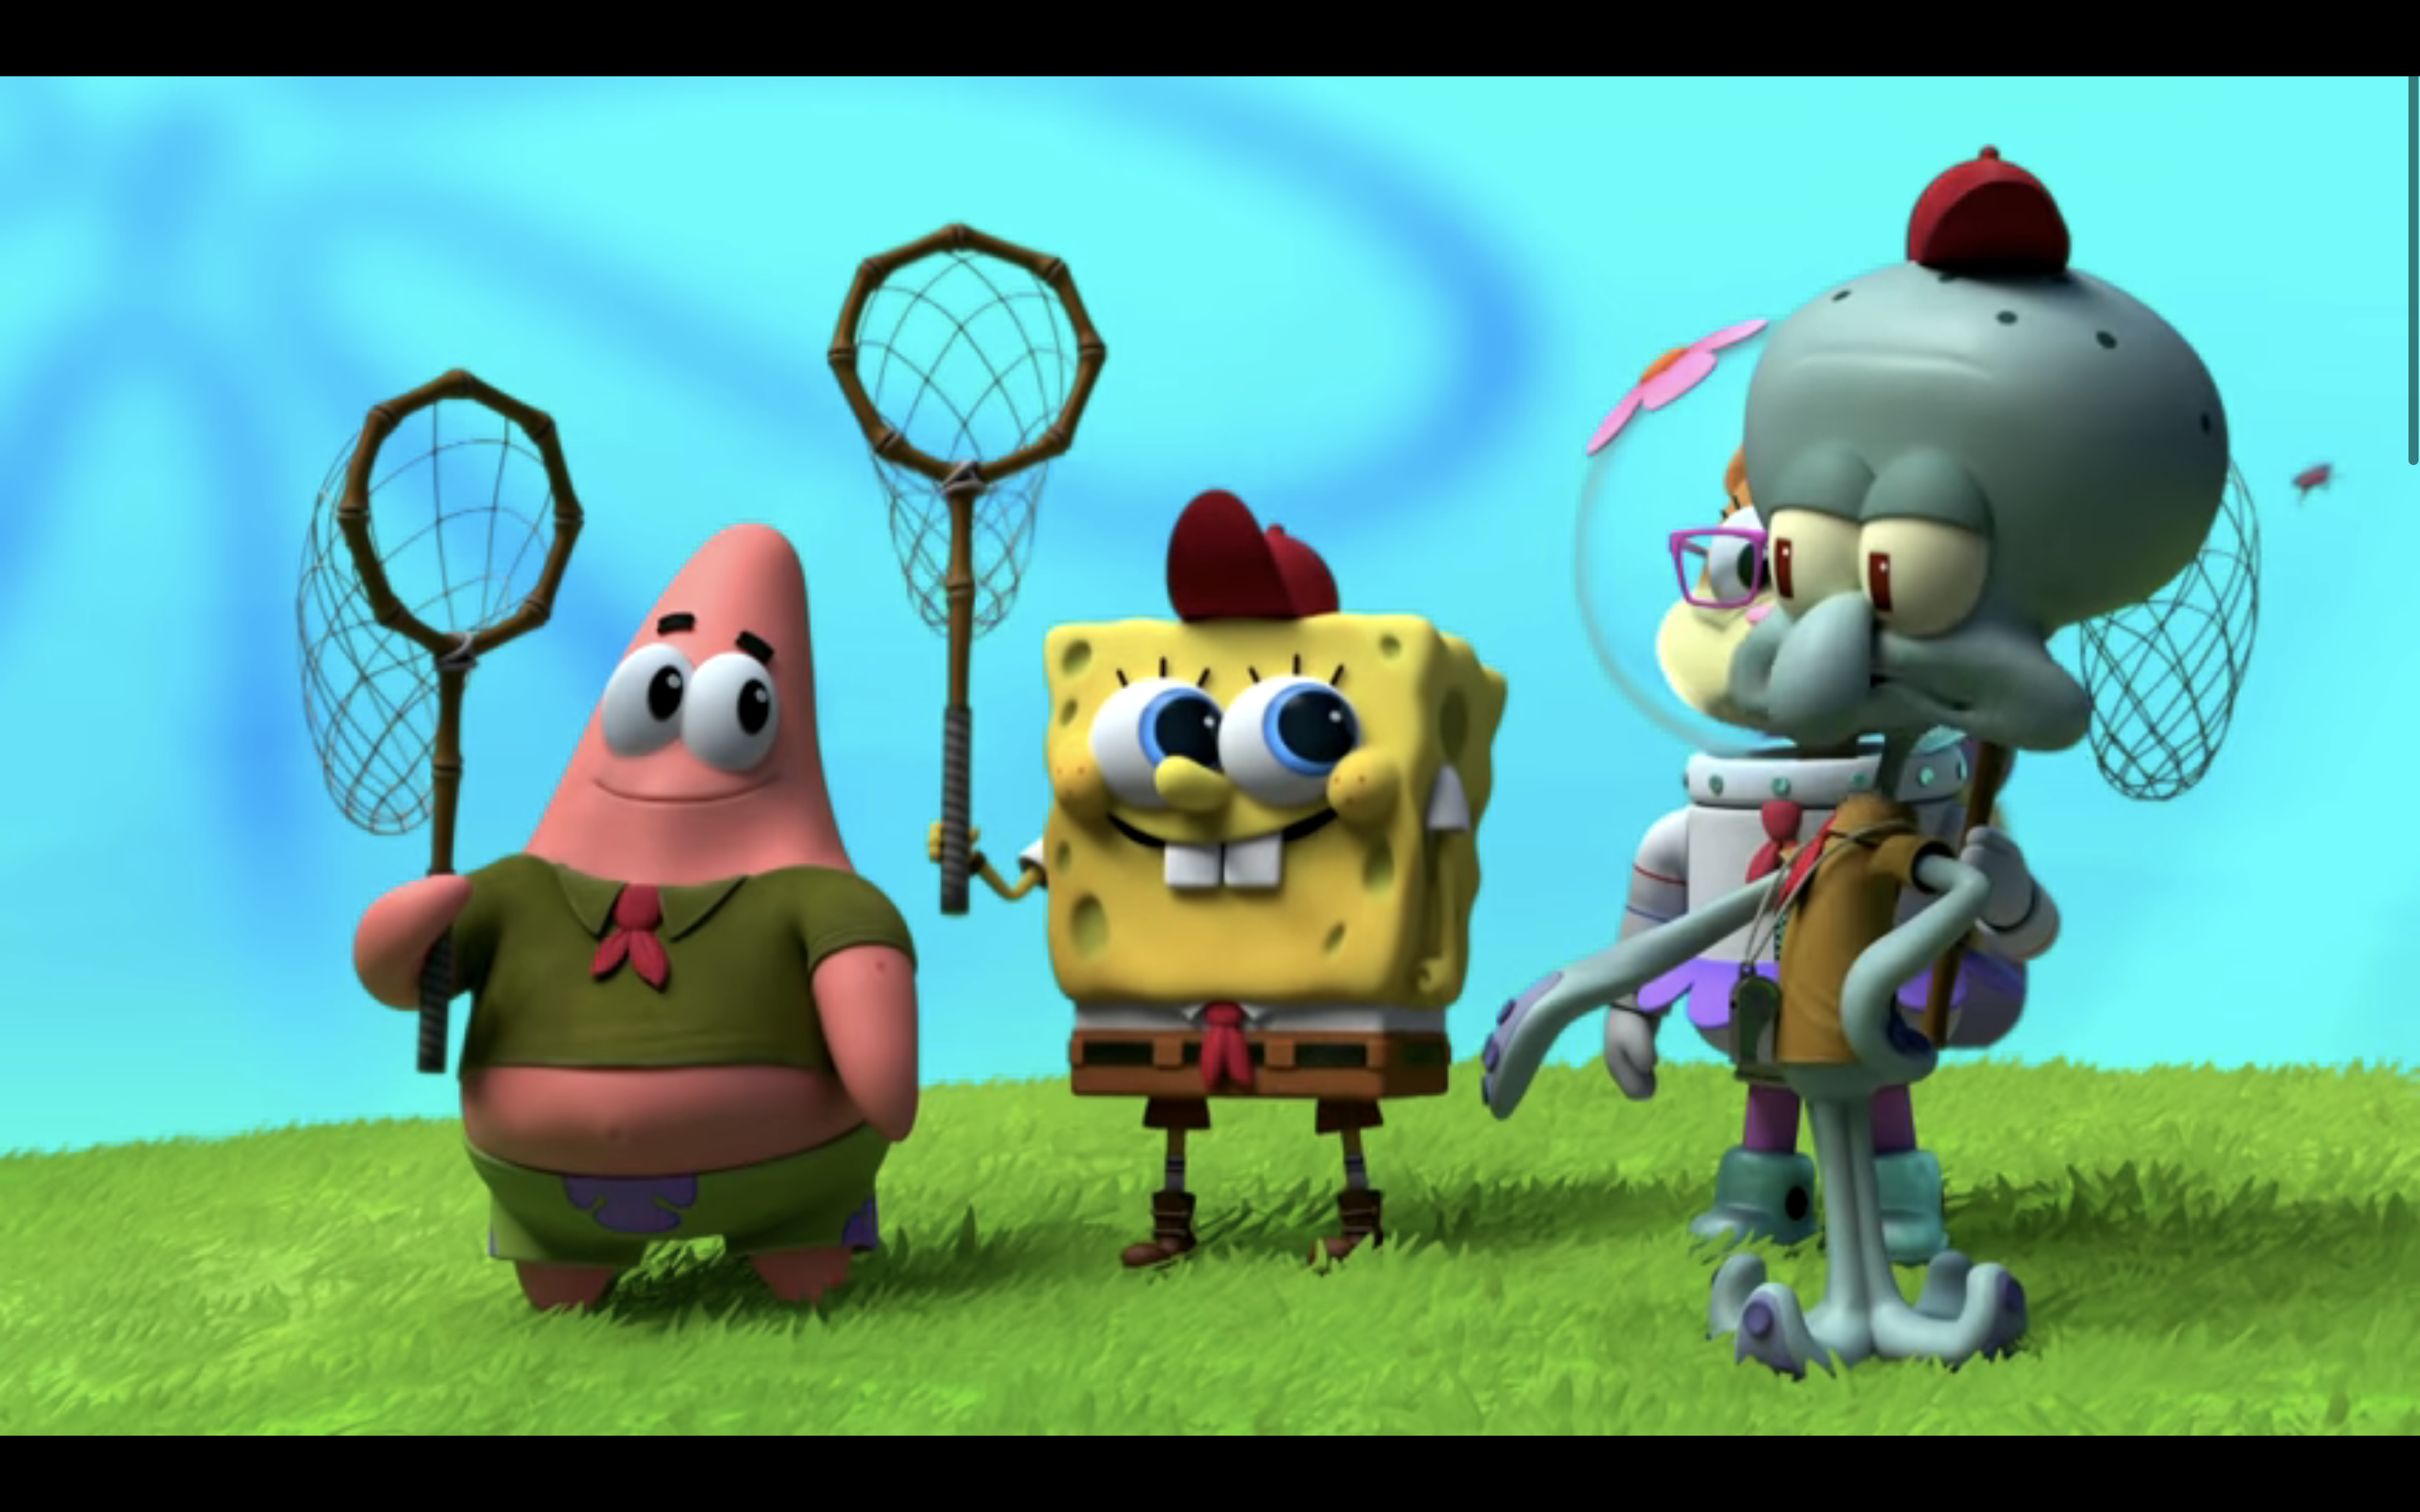 The NFL is going to do a game broadcast for kids with Spongebob